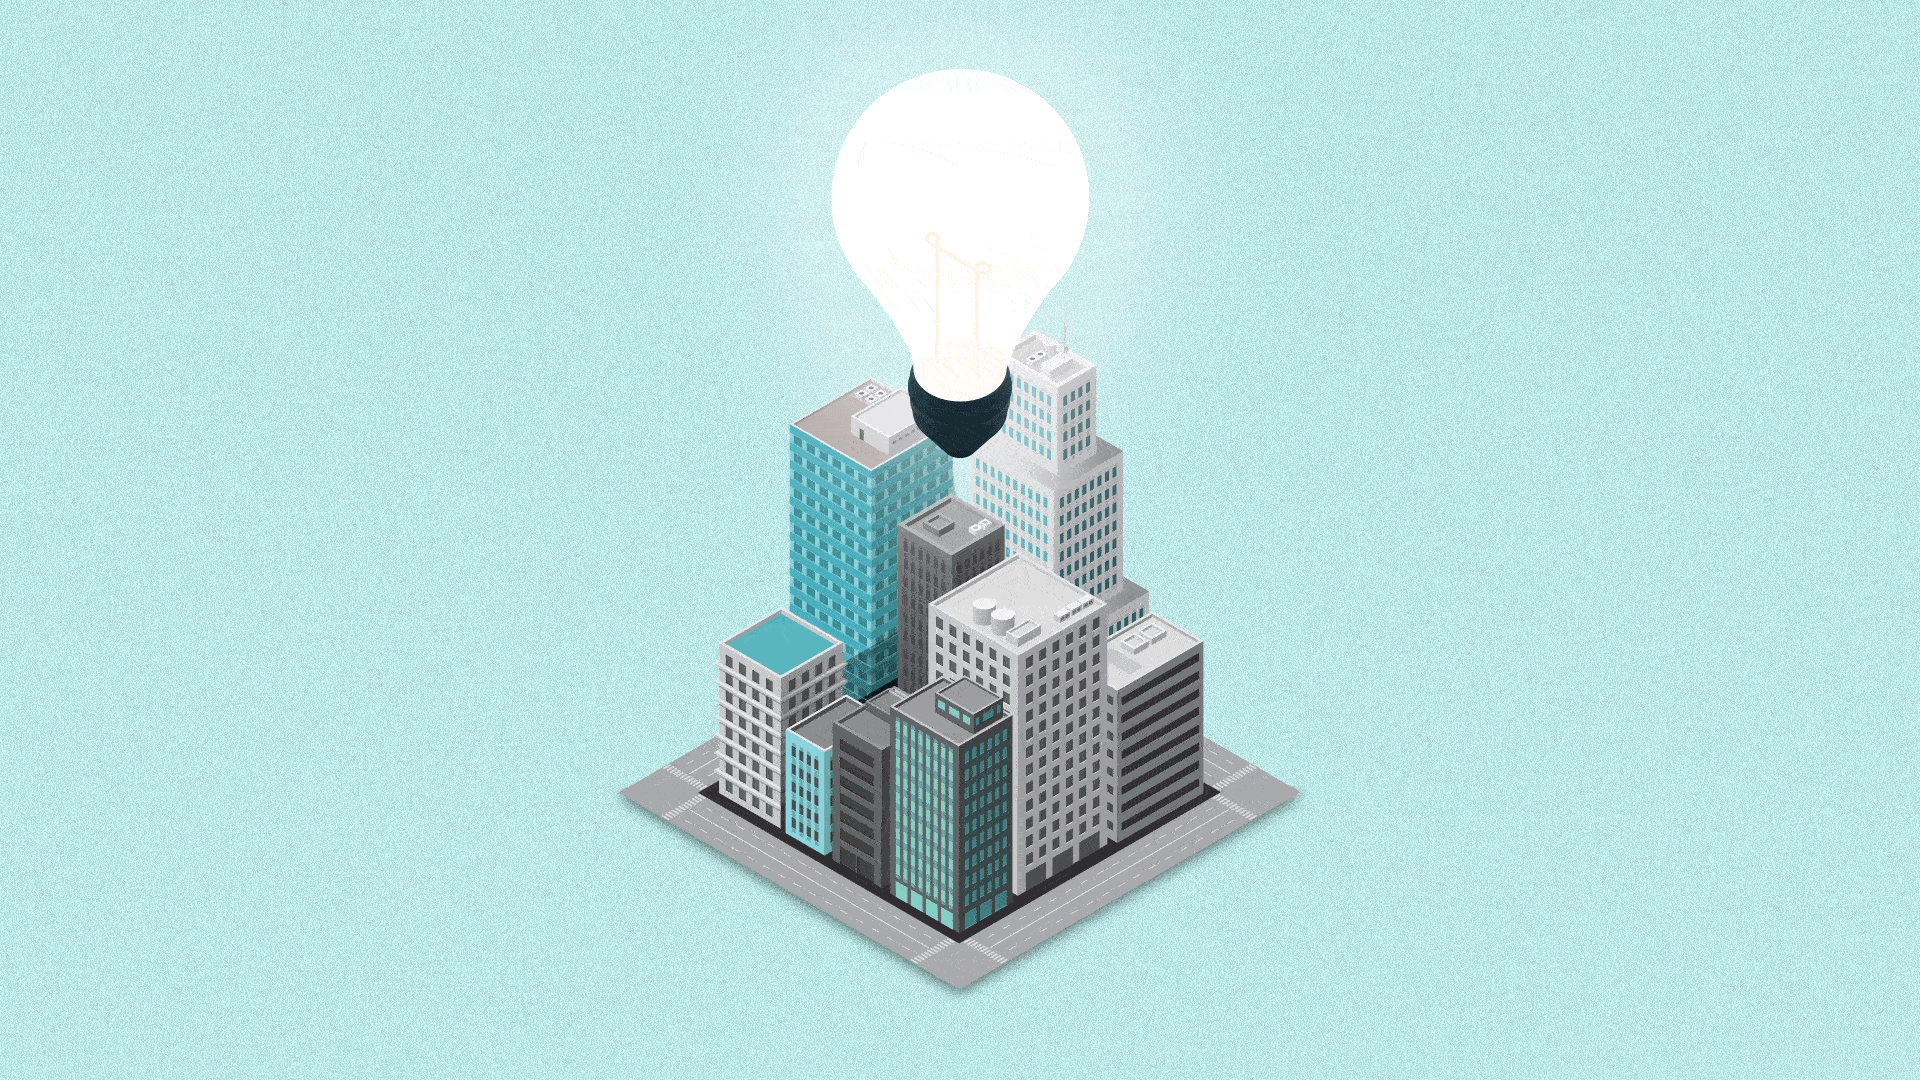 Animated illustration of a lightbulb hovering over a city block.